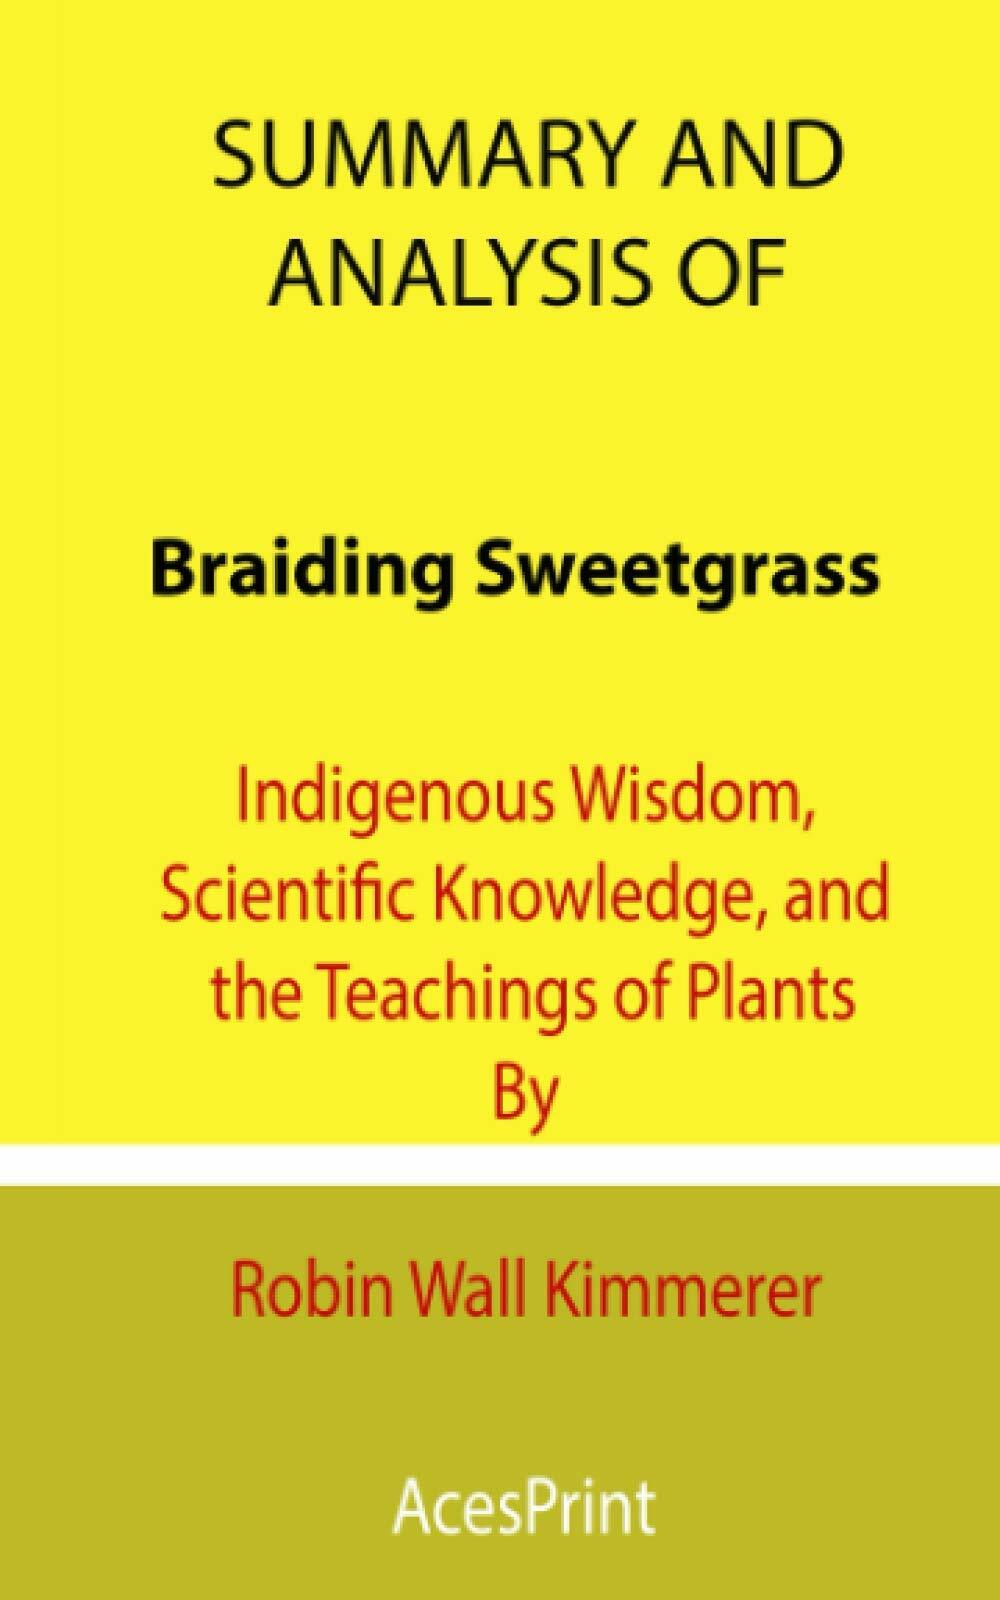 Summary and Analysis of Braiding Sweetgrass: Indigenous Wisdom, Scientific Knowledge, and the Teaching of Plants By Robin Wall Kimmerer (Paperback)